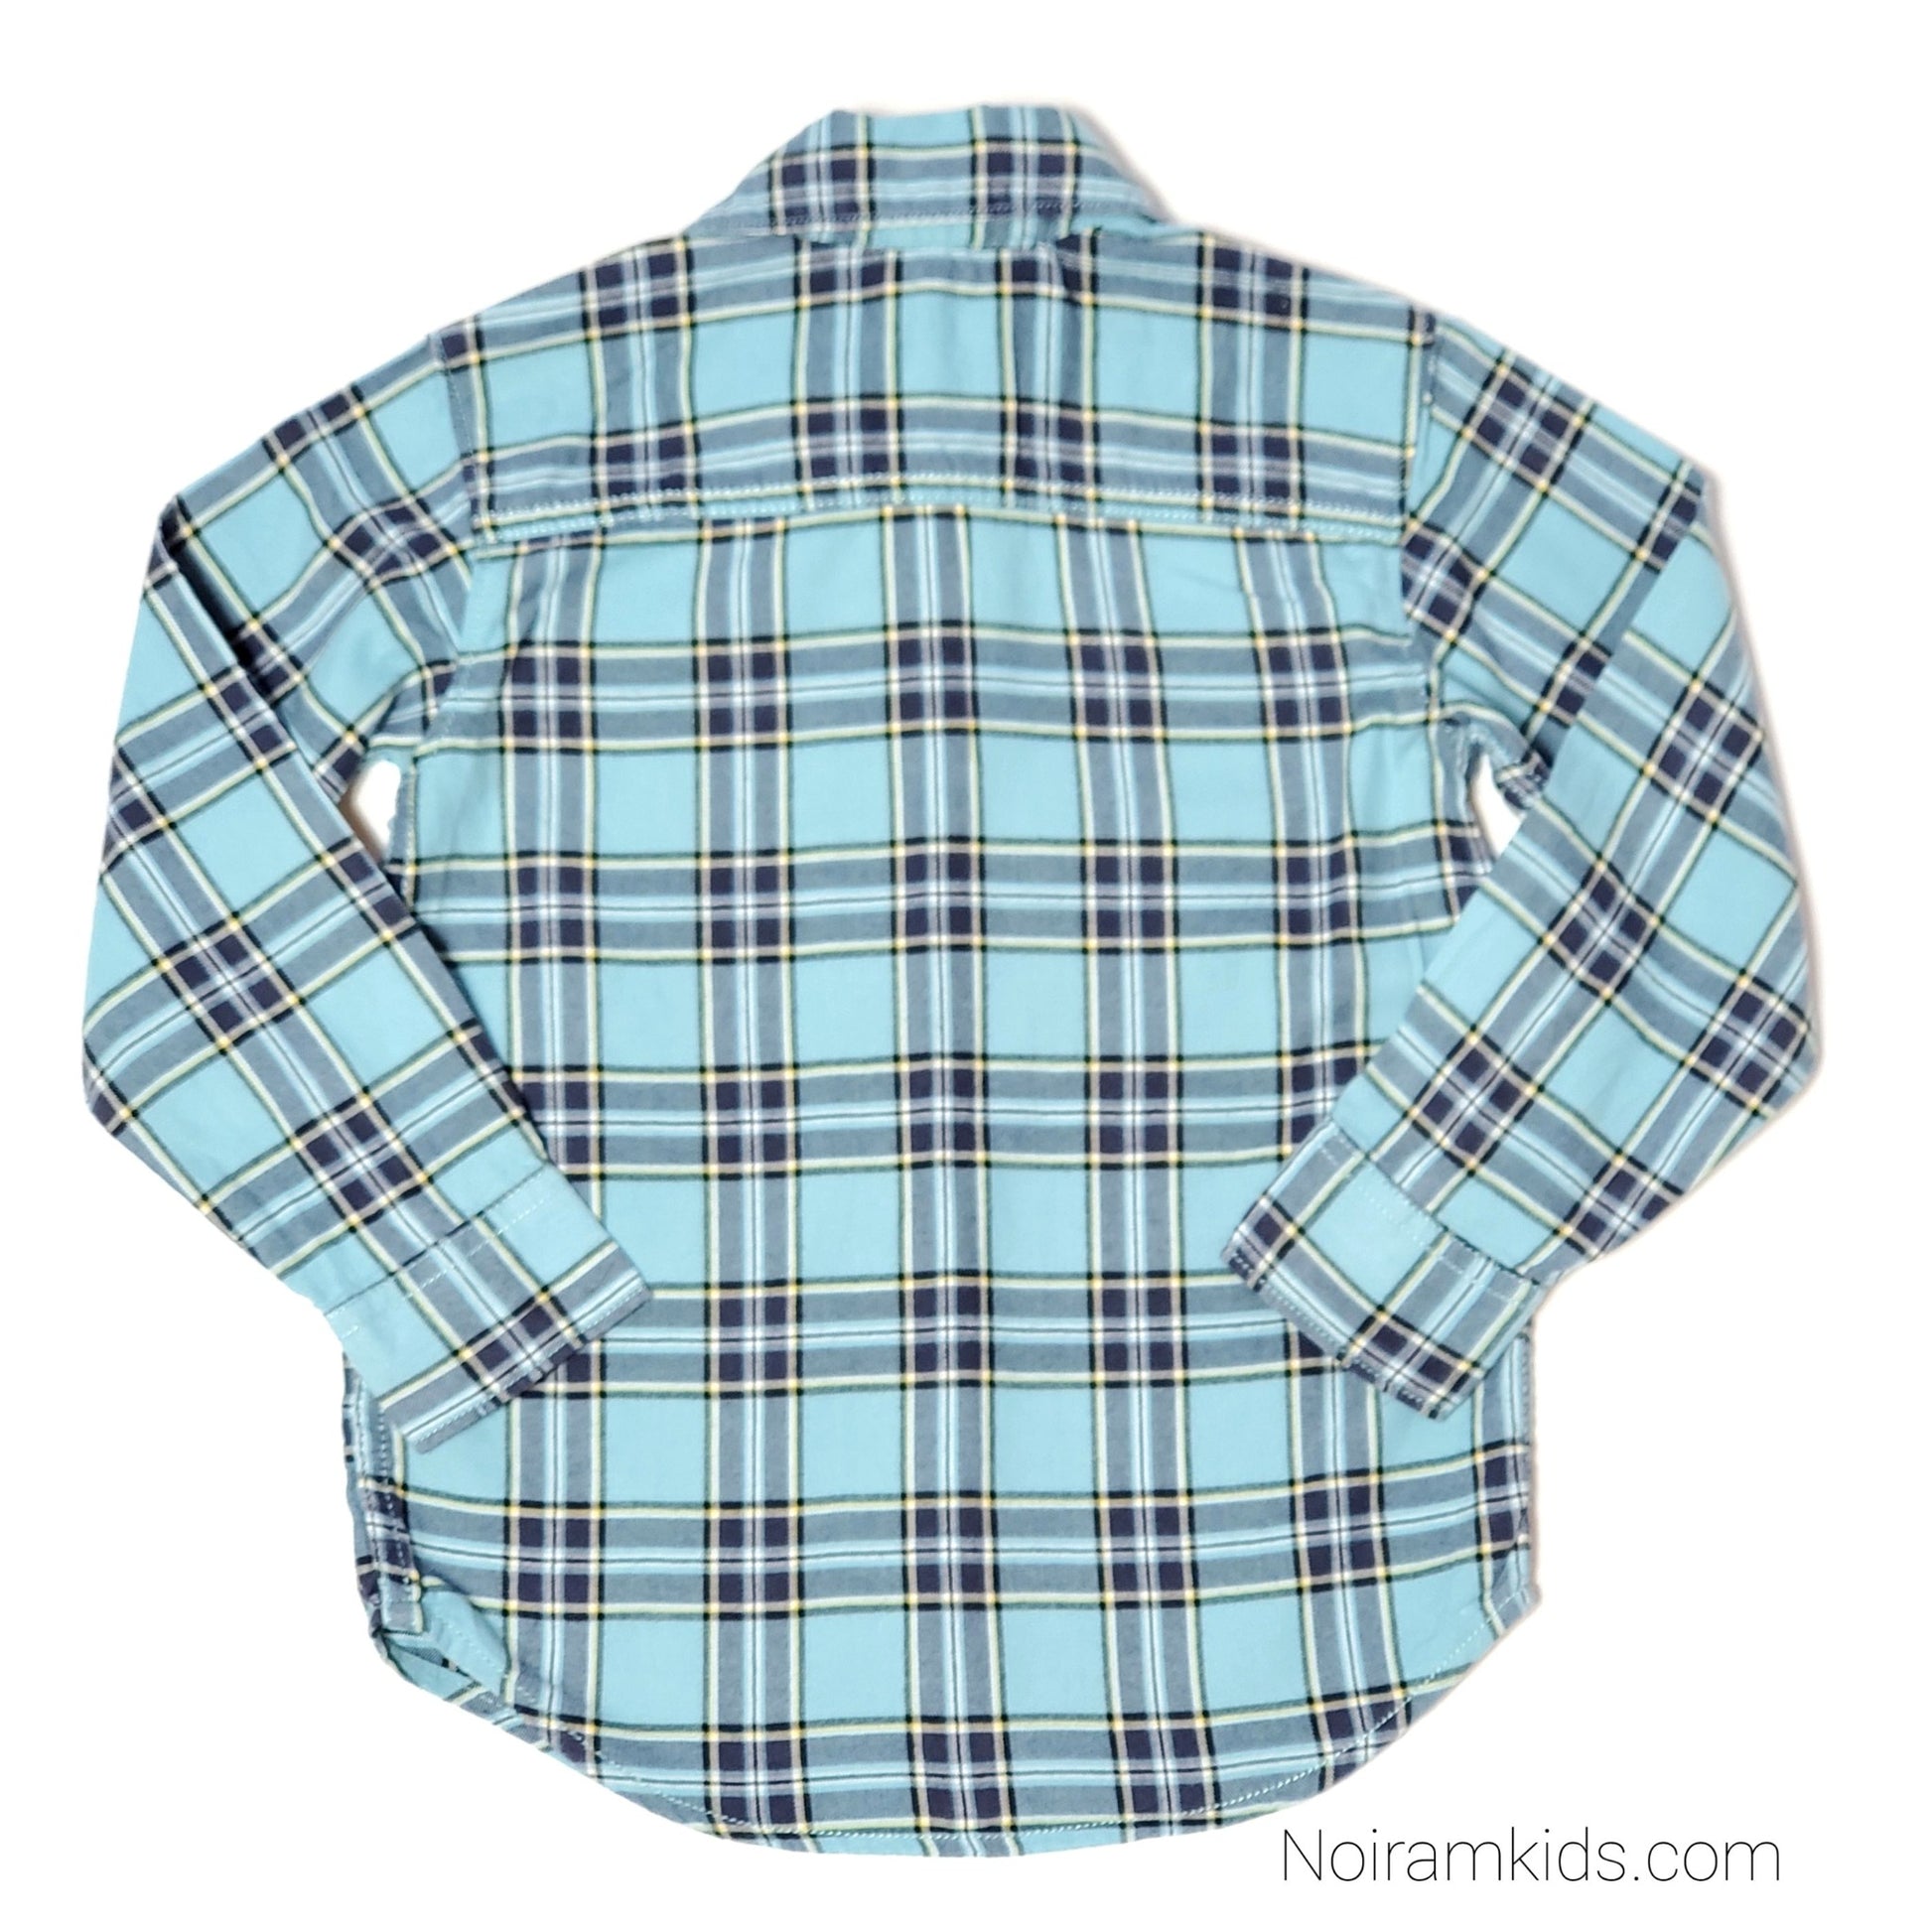 Carters Boys Blue Flannel Plaid Shirt 4T Used View 2